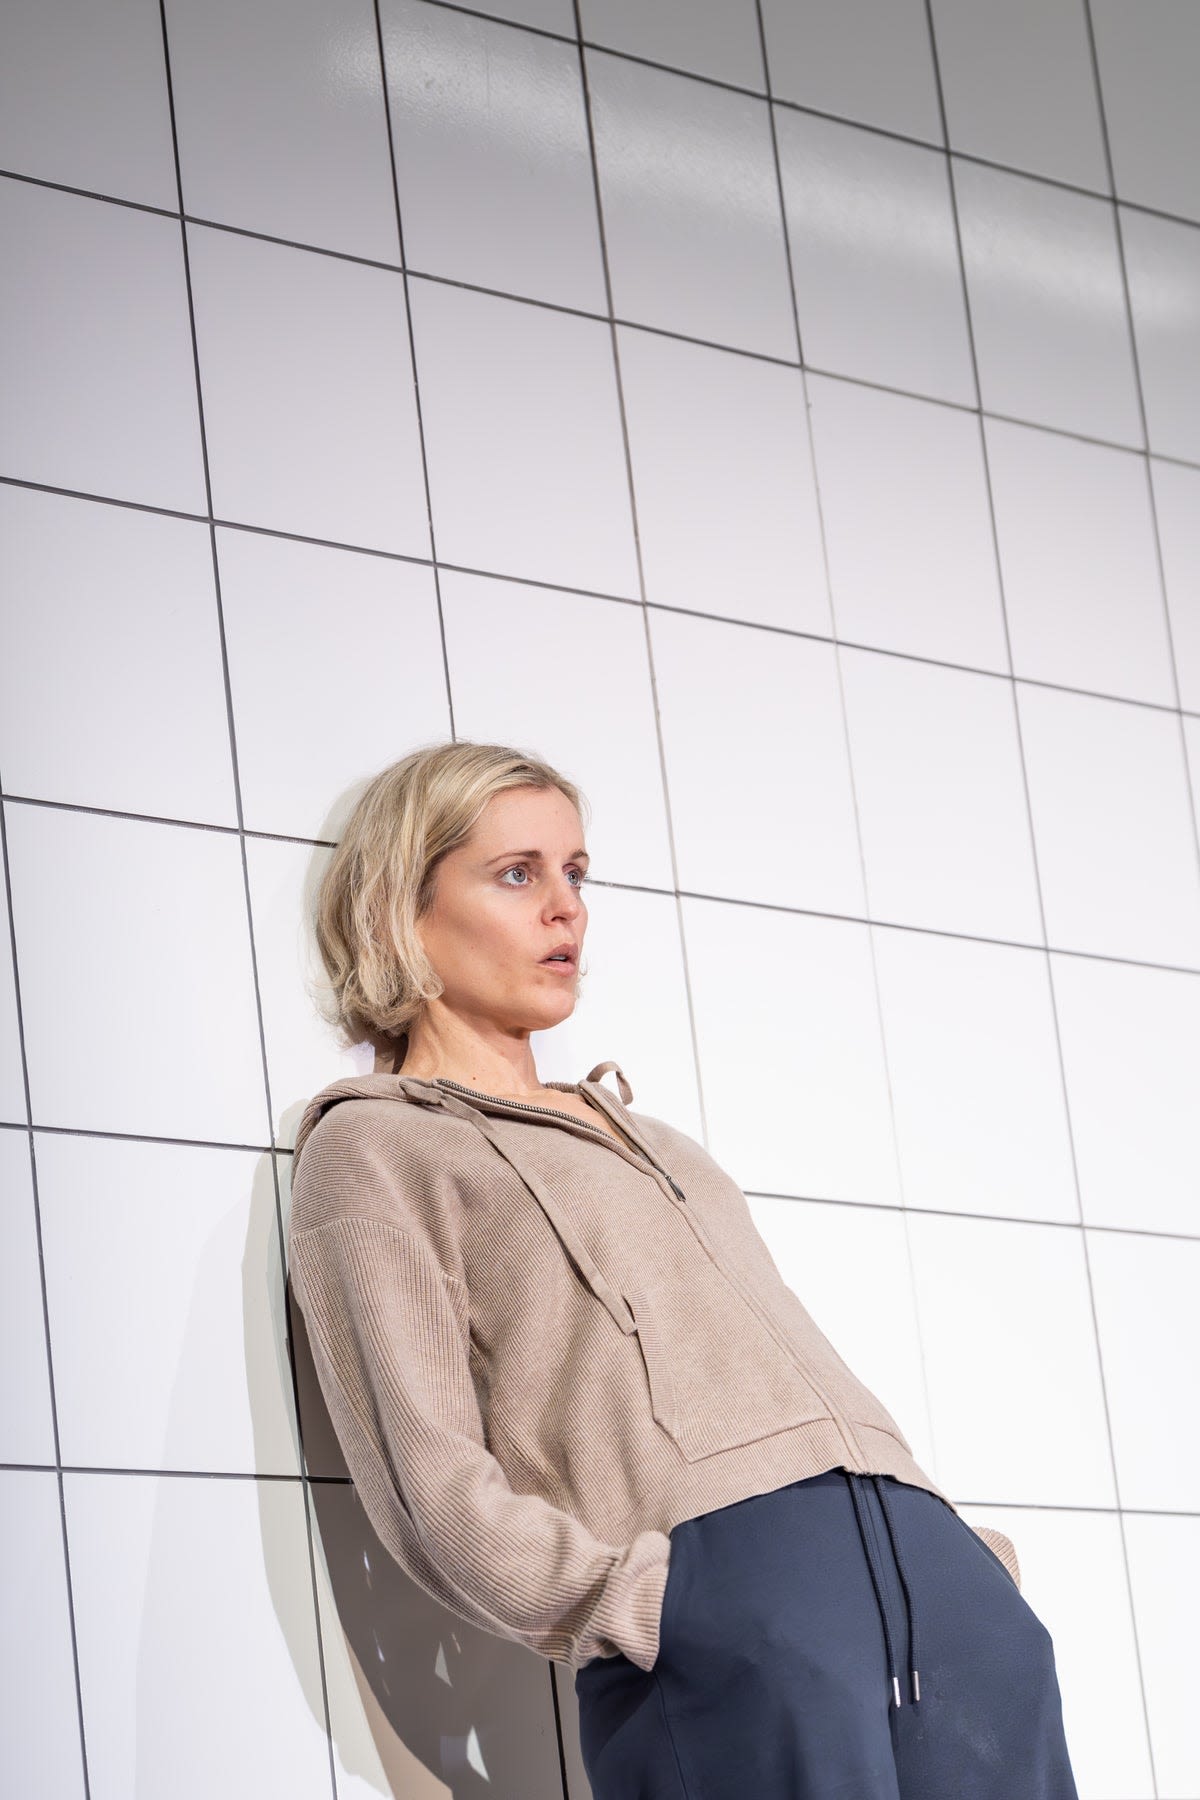 People, Places & Things star Denise Gough: I can talk about my abuse and addiction now